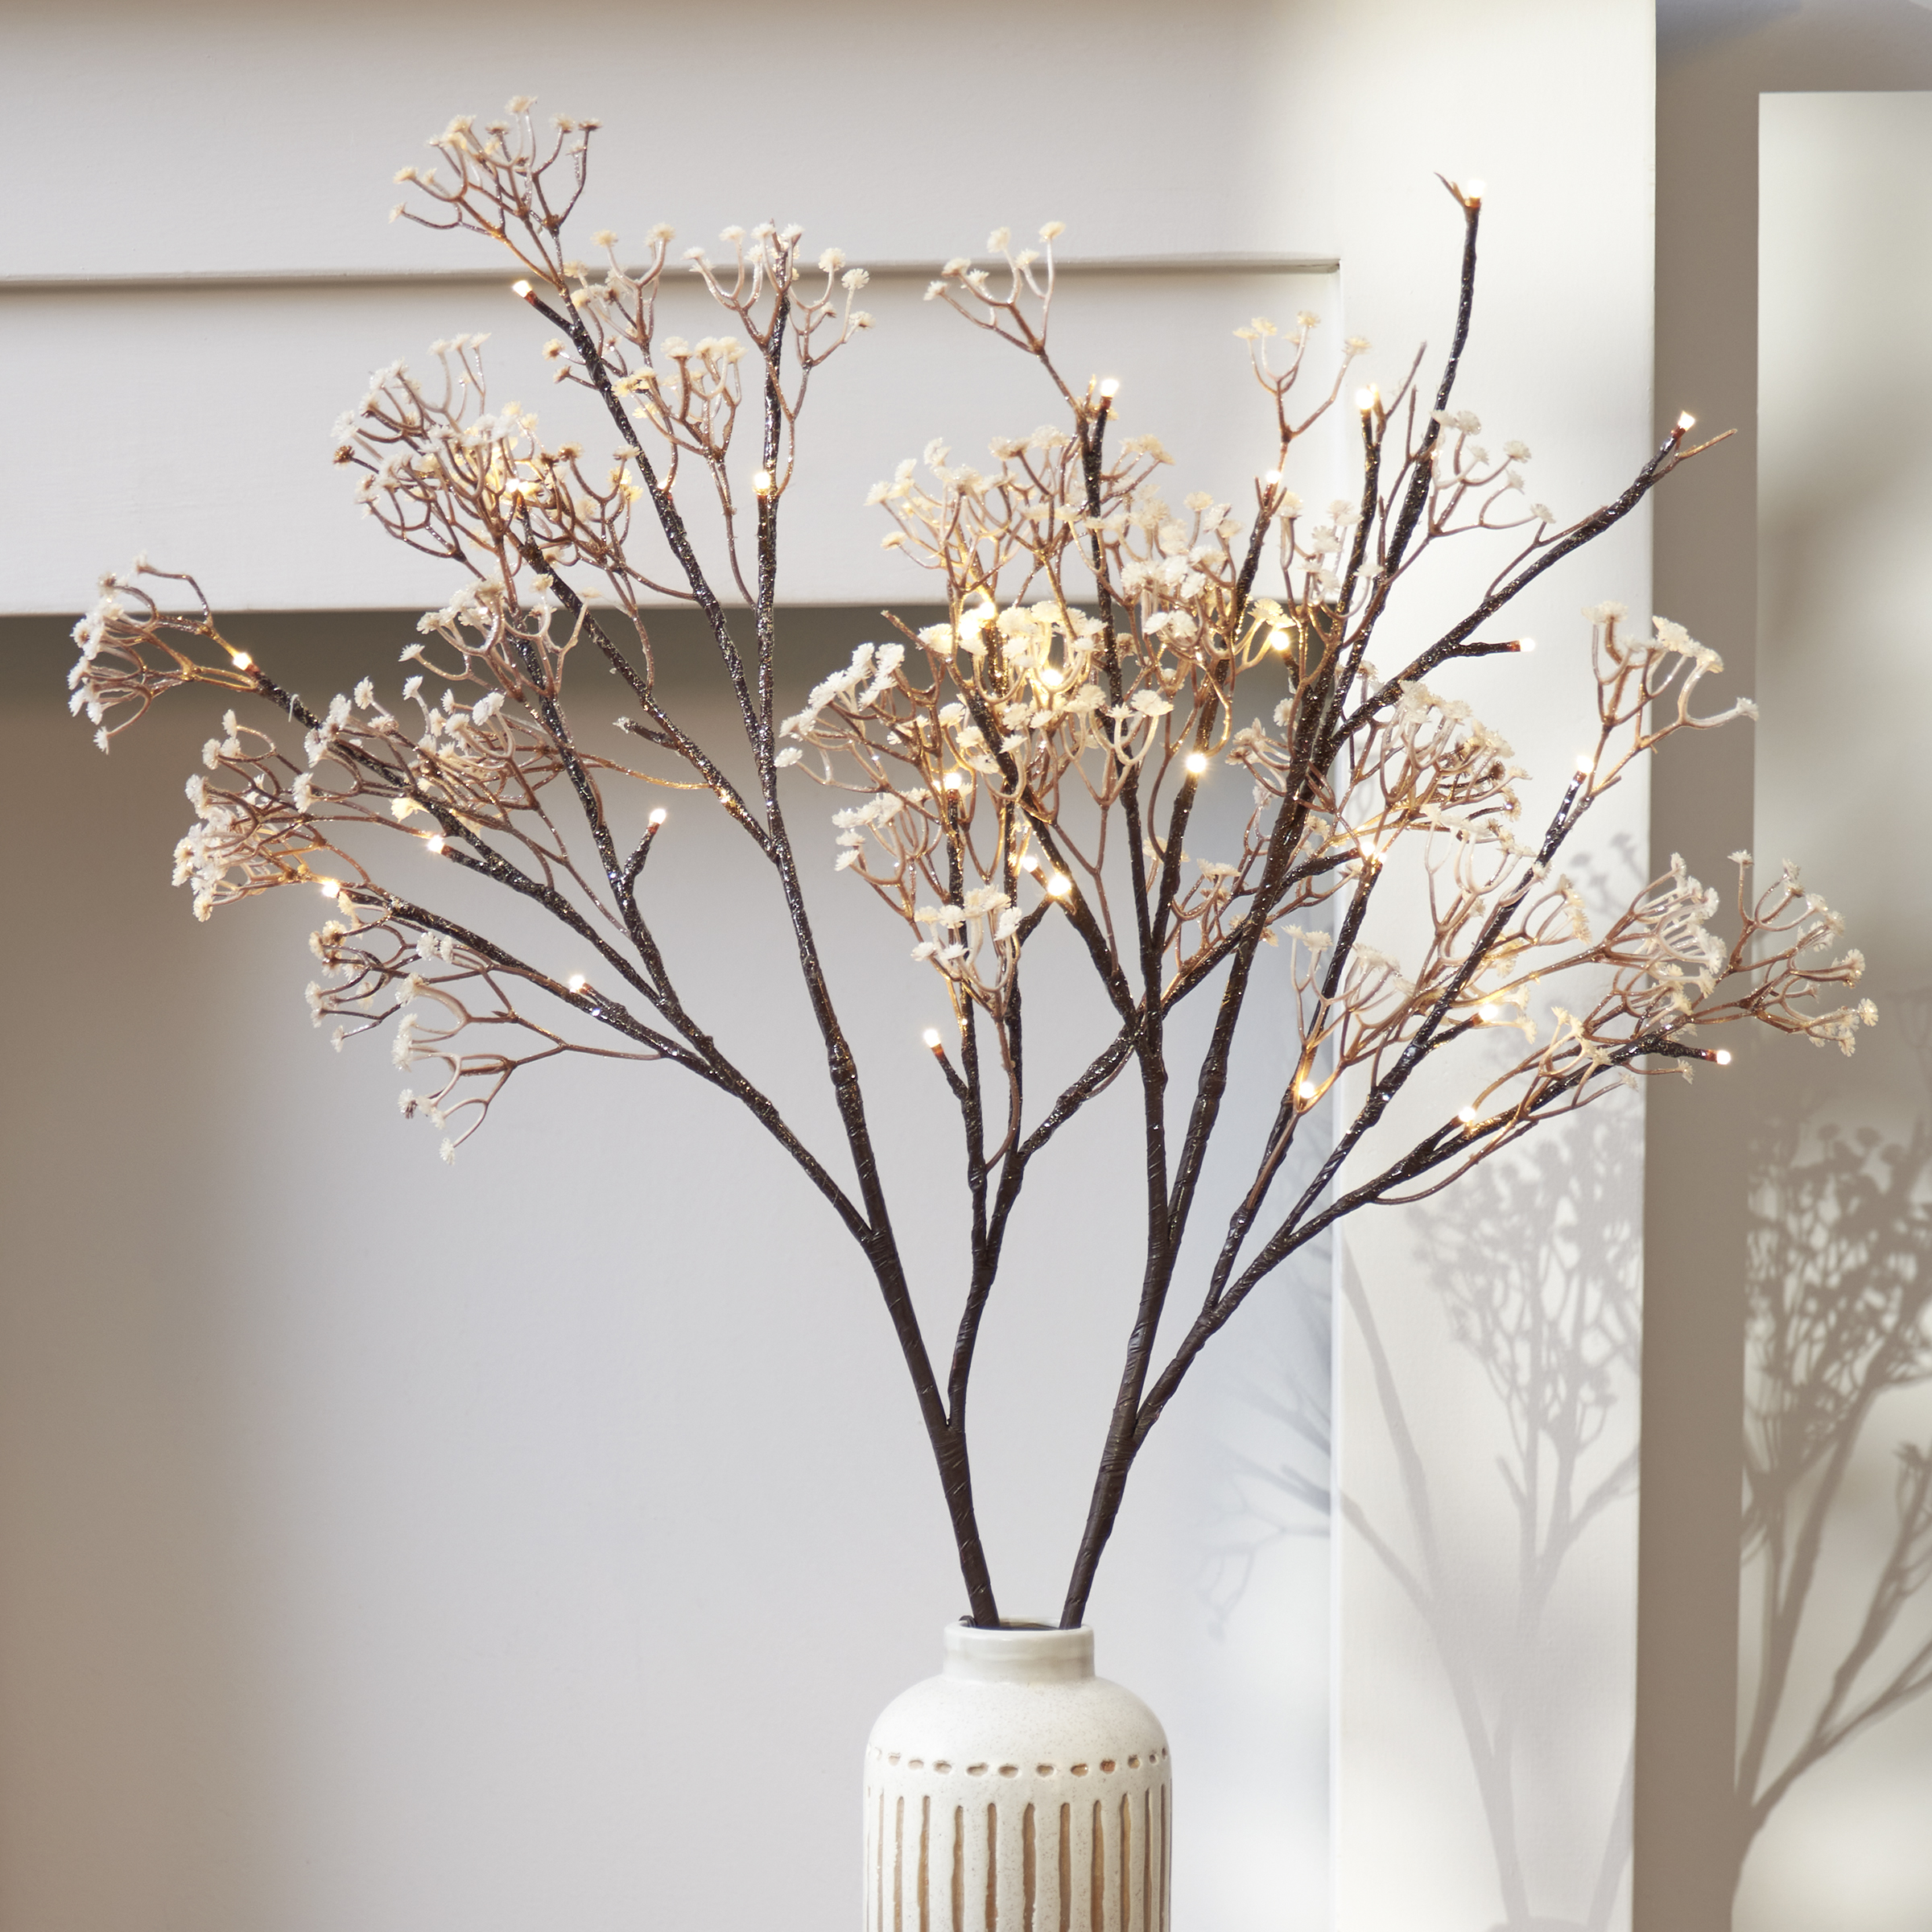 Artificial Twig, Twigs, Rustic Decor, Home Decor, Autumnal Flower